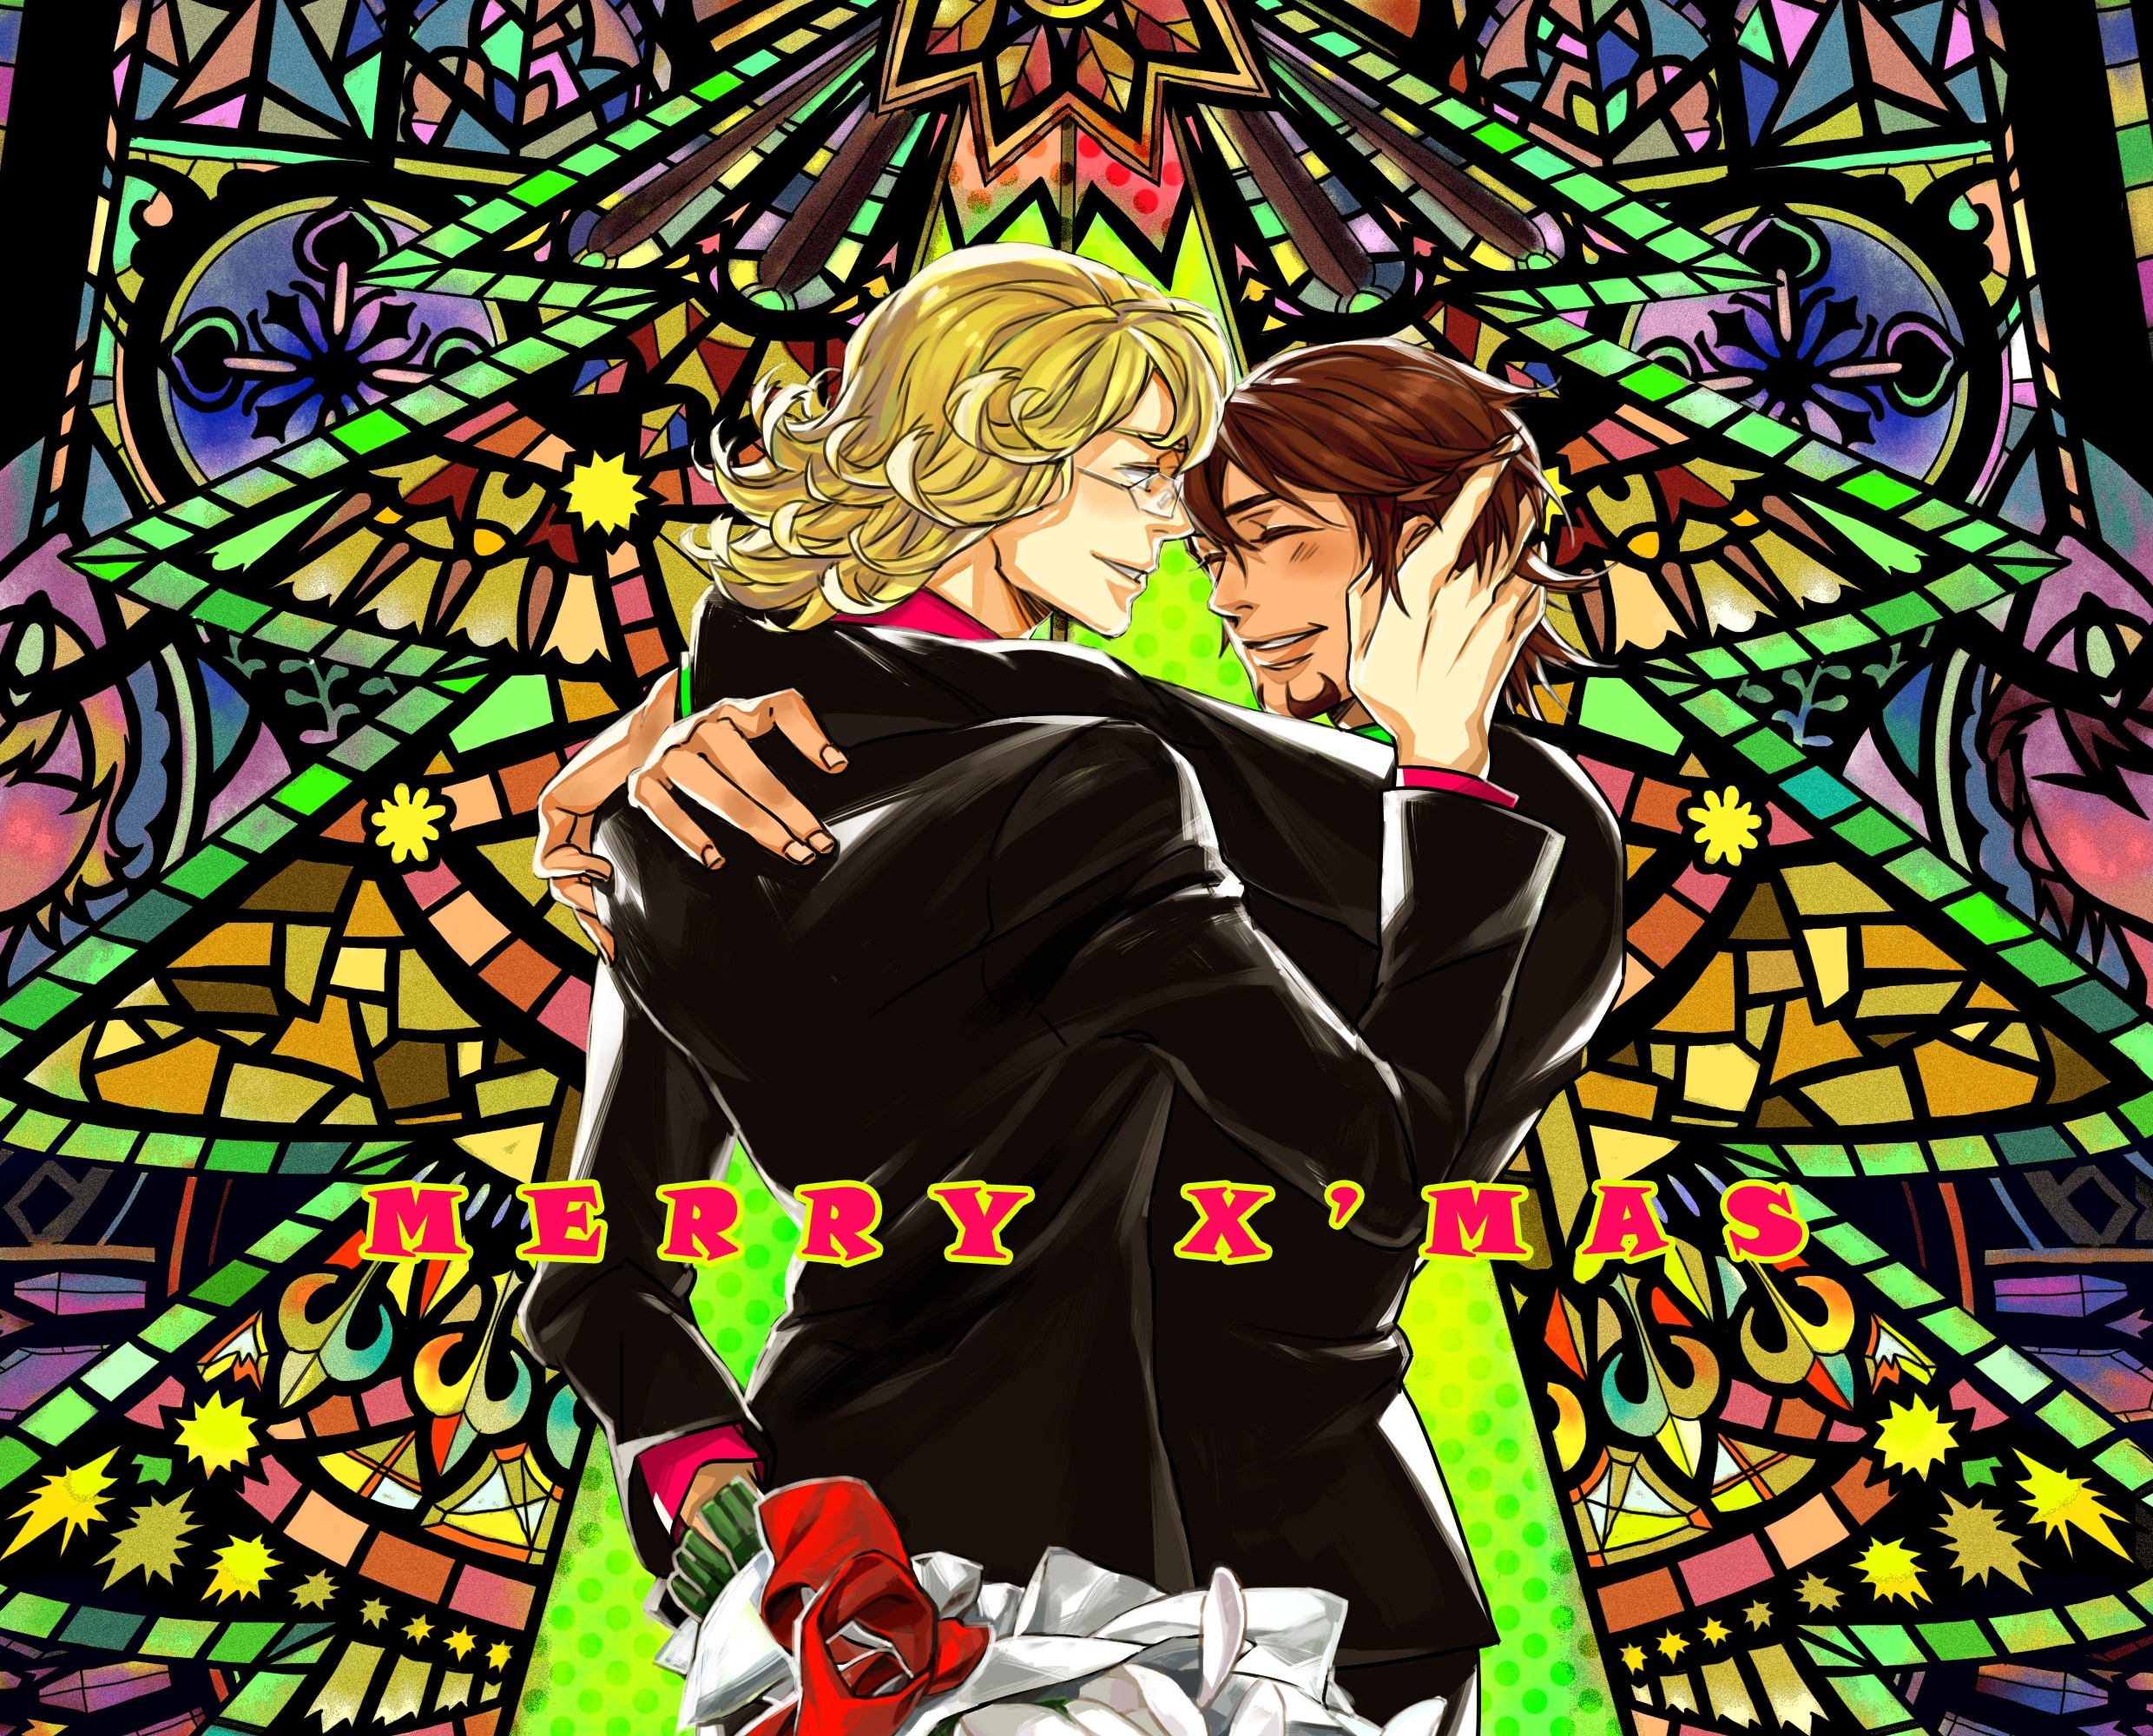 Anime Tiger & Bunny HD Wallpaper | Background Image